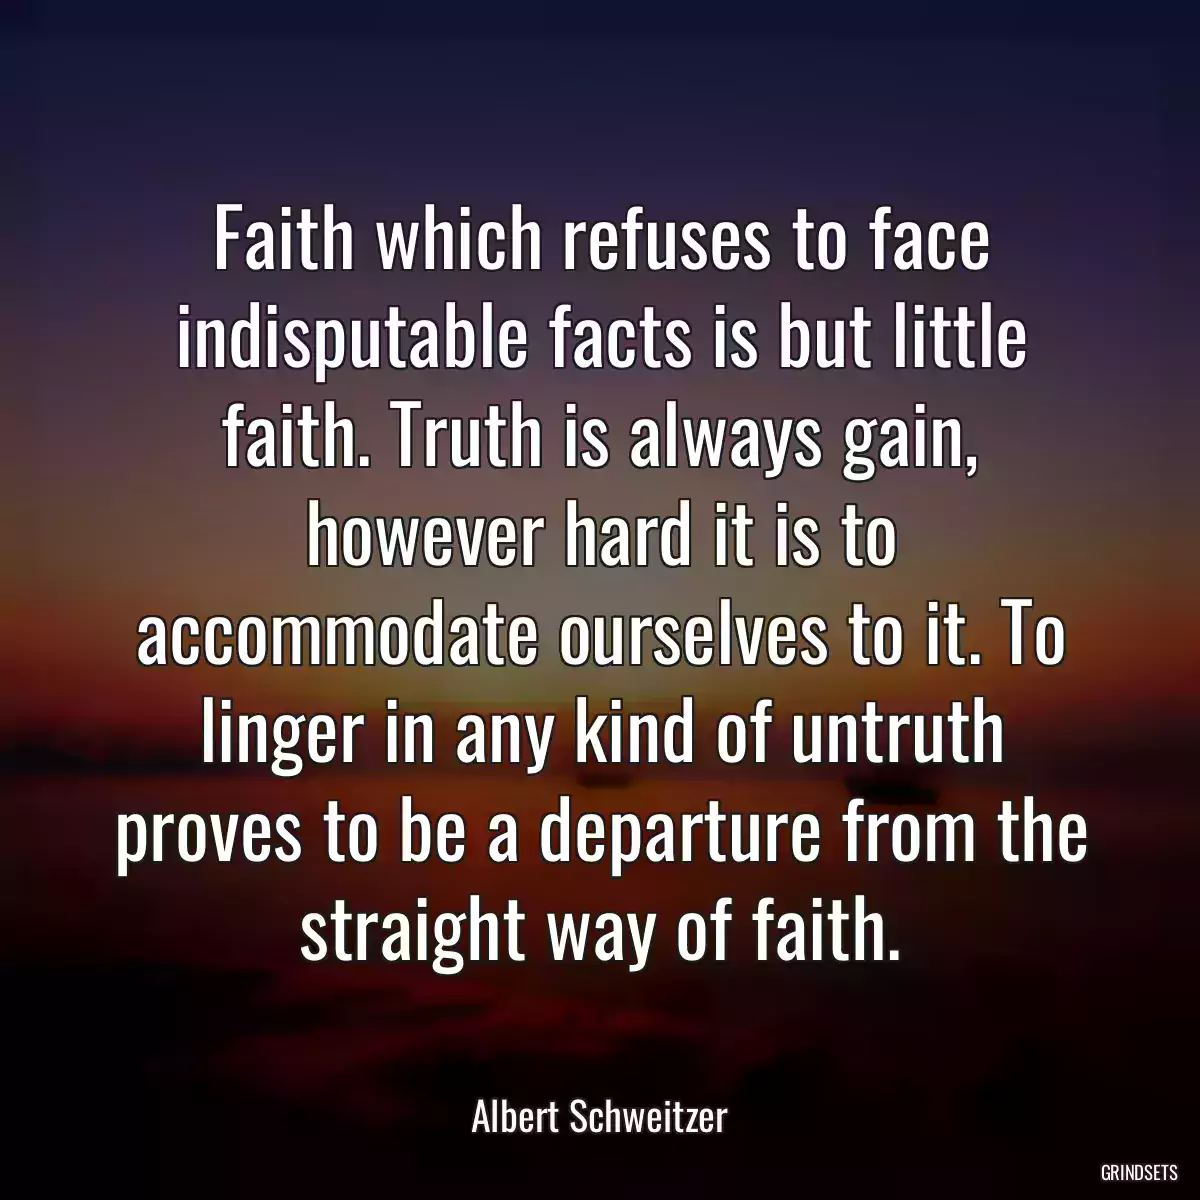 Faith which refuses to face indisputable facts is but little faith. Truth is always gain, however hard it is to accommodate ourselves to it. To linger in any kind of untruth proves to be a departure from the straight way of faith.